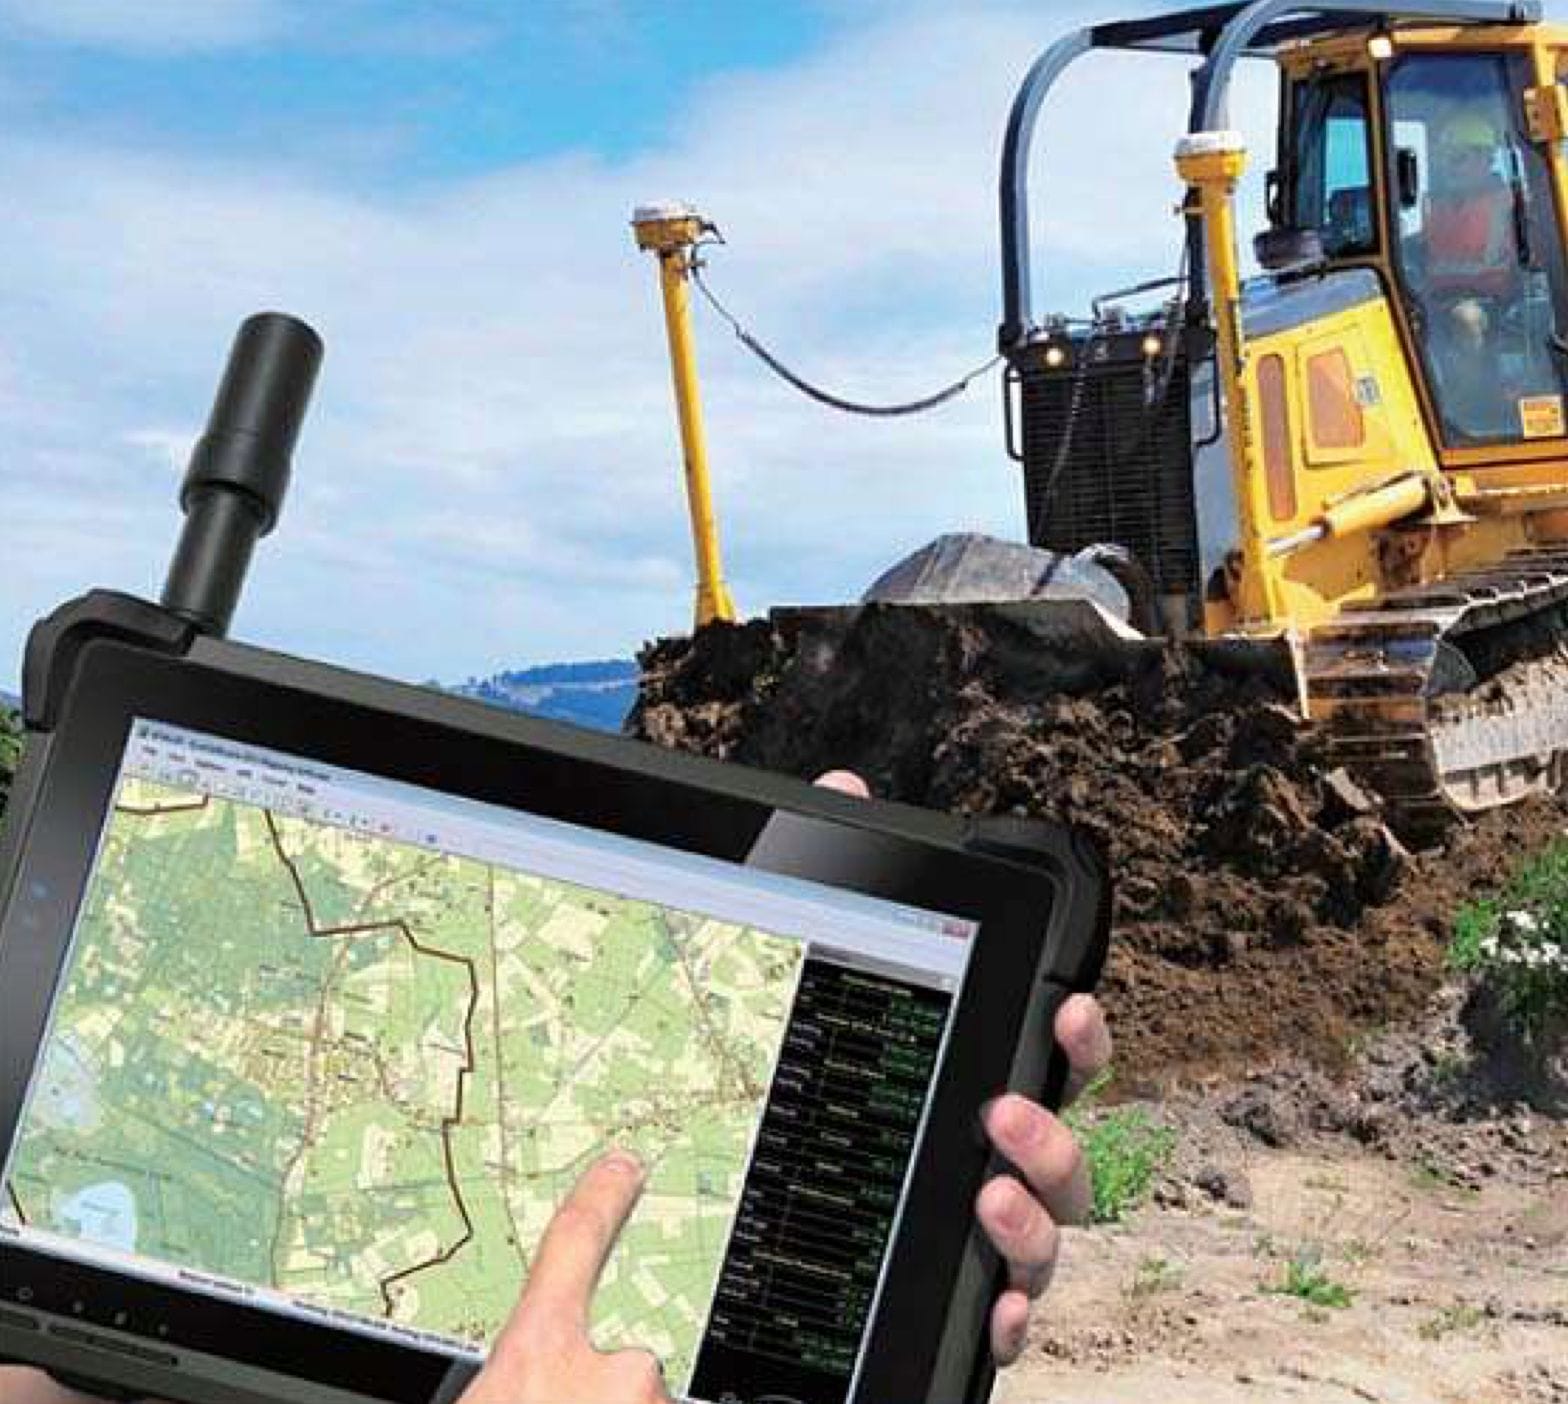 DT Research Introduces First Purpose-Built Rugged Tablet with Scientific-Grade GNSS